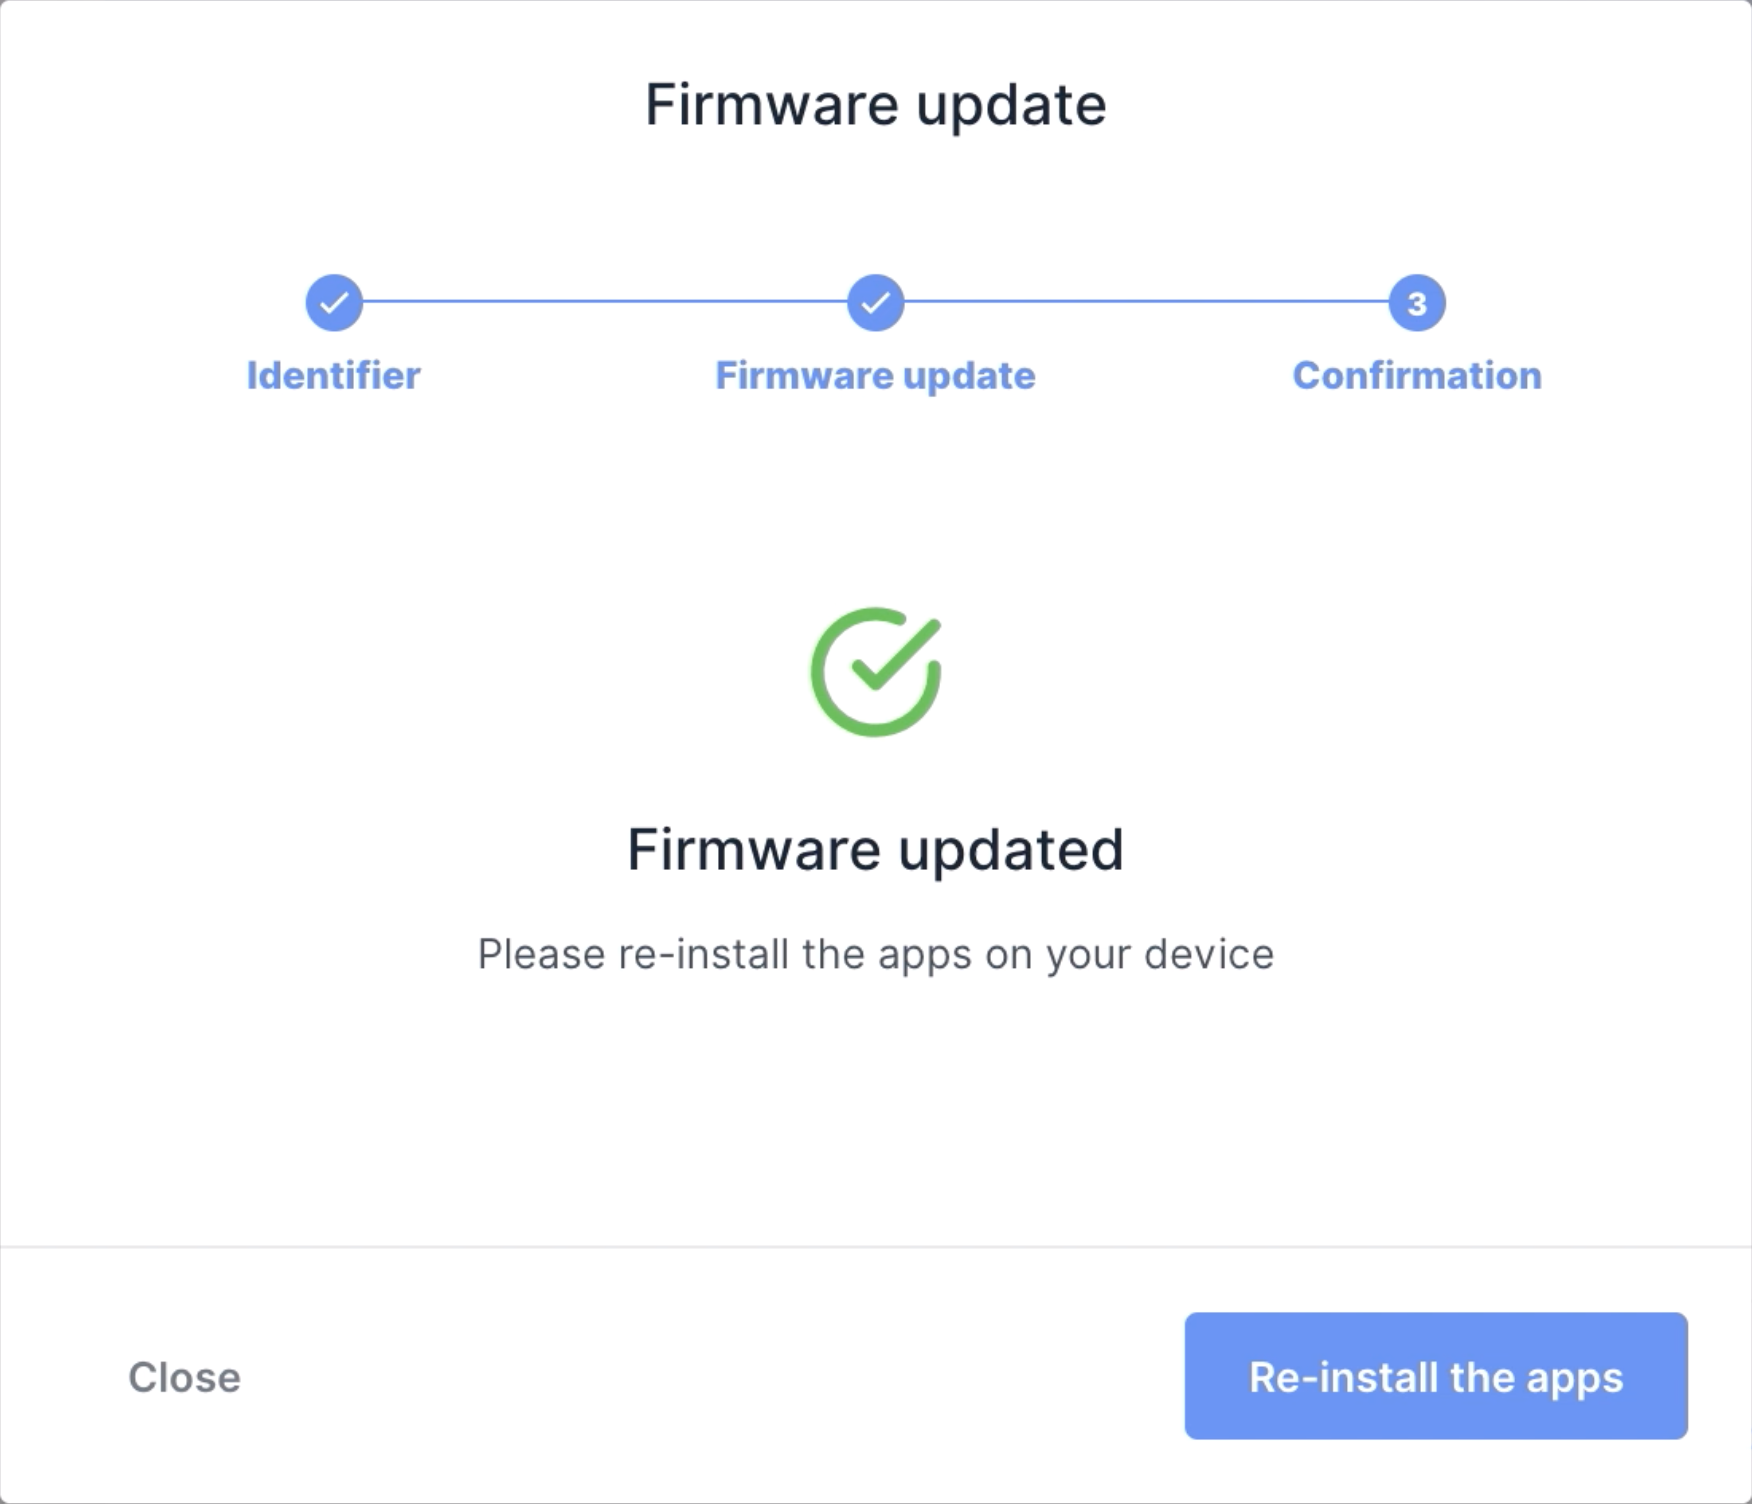 How do I perform a firmware update on my Ledger device?